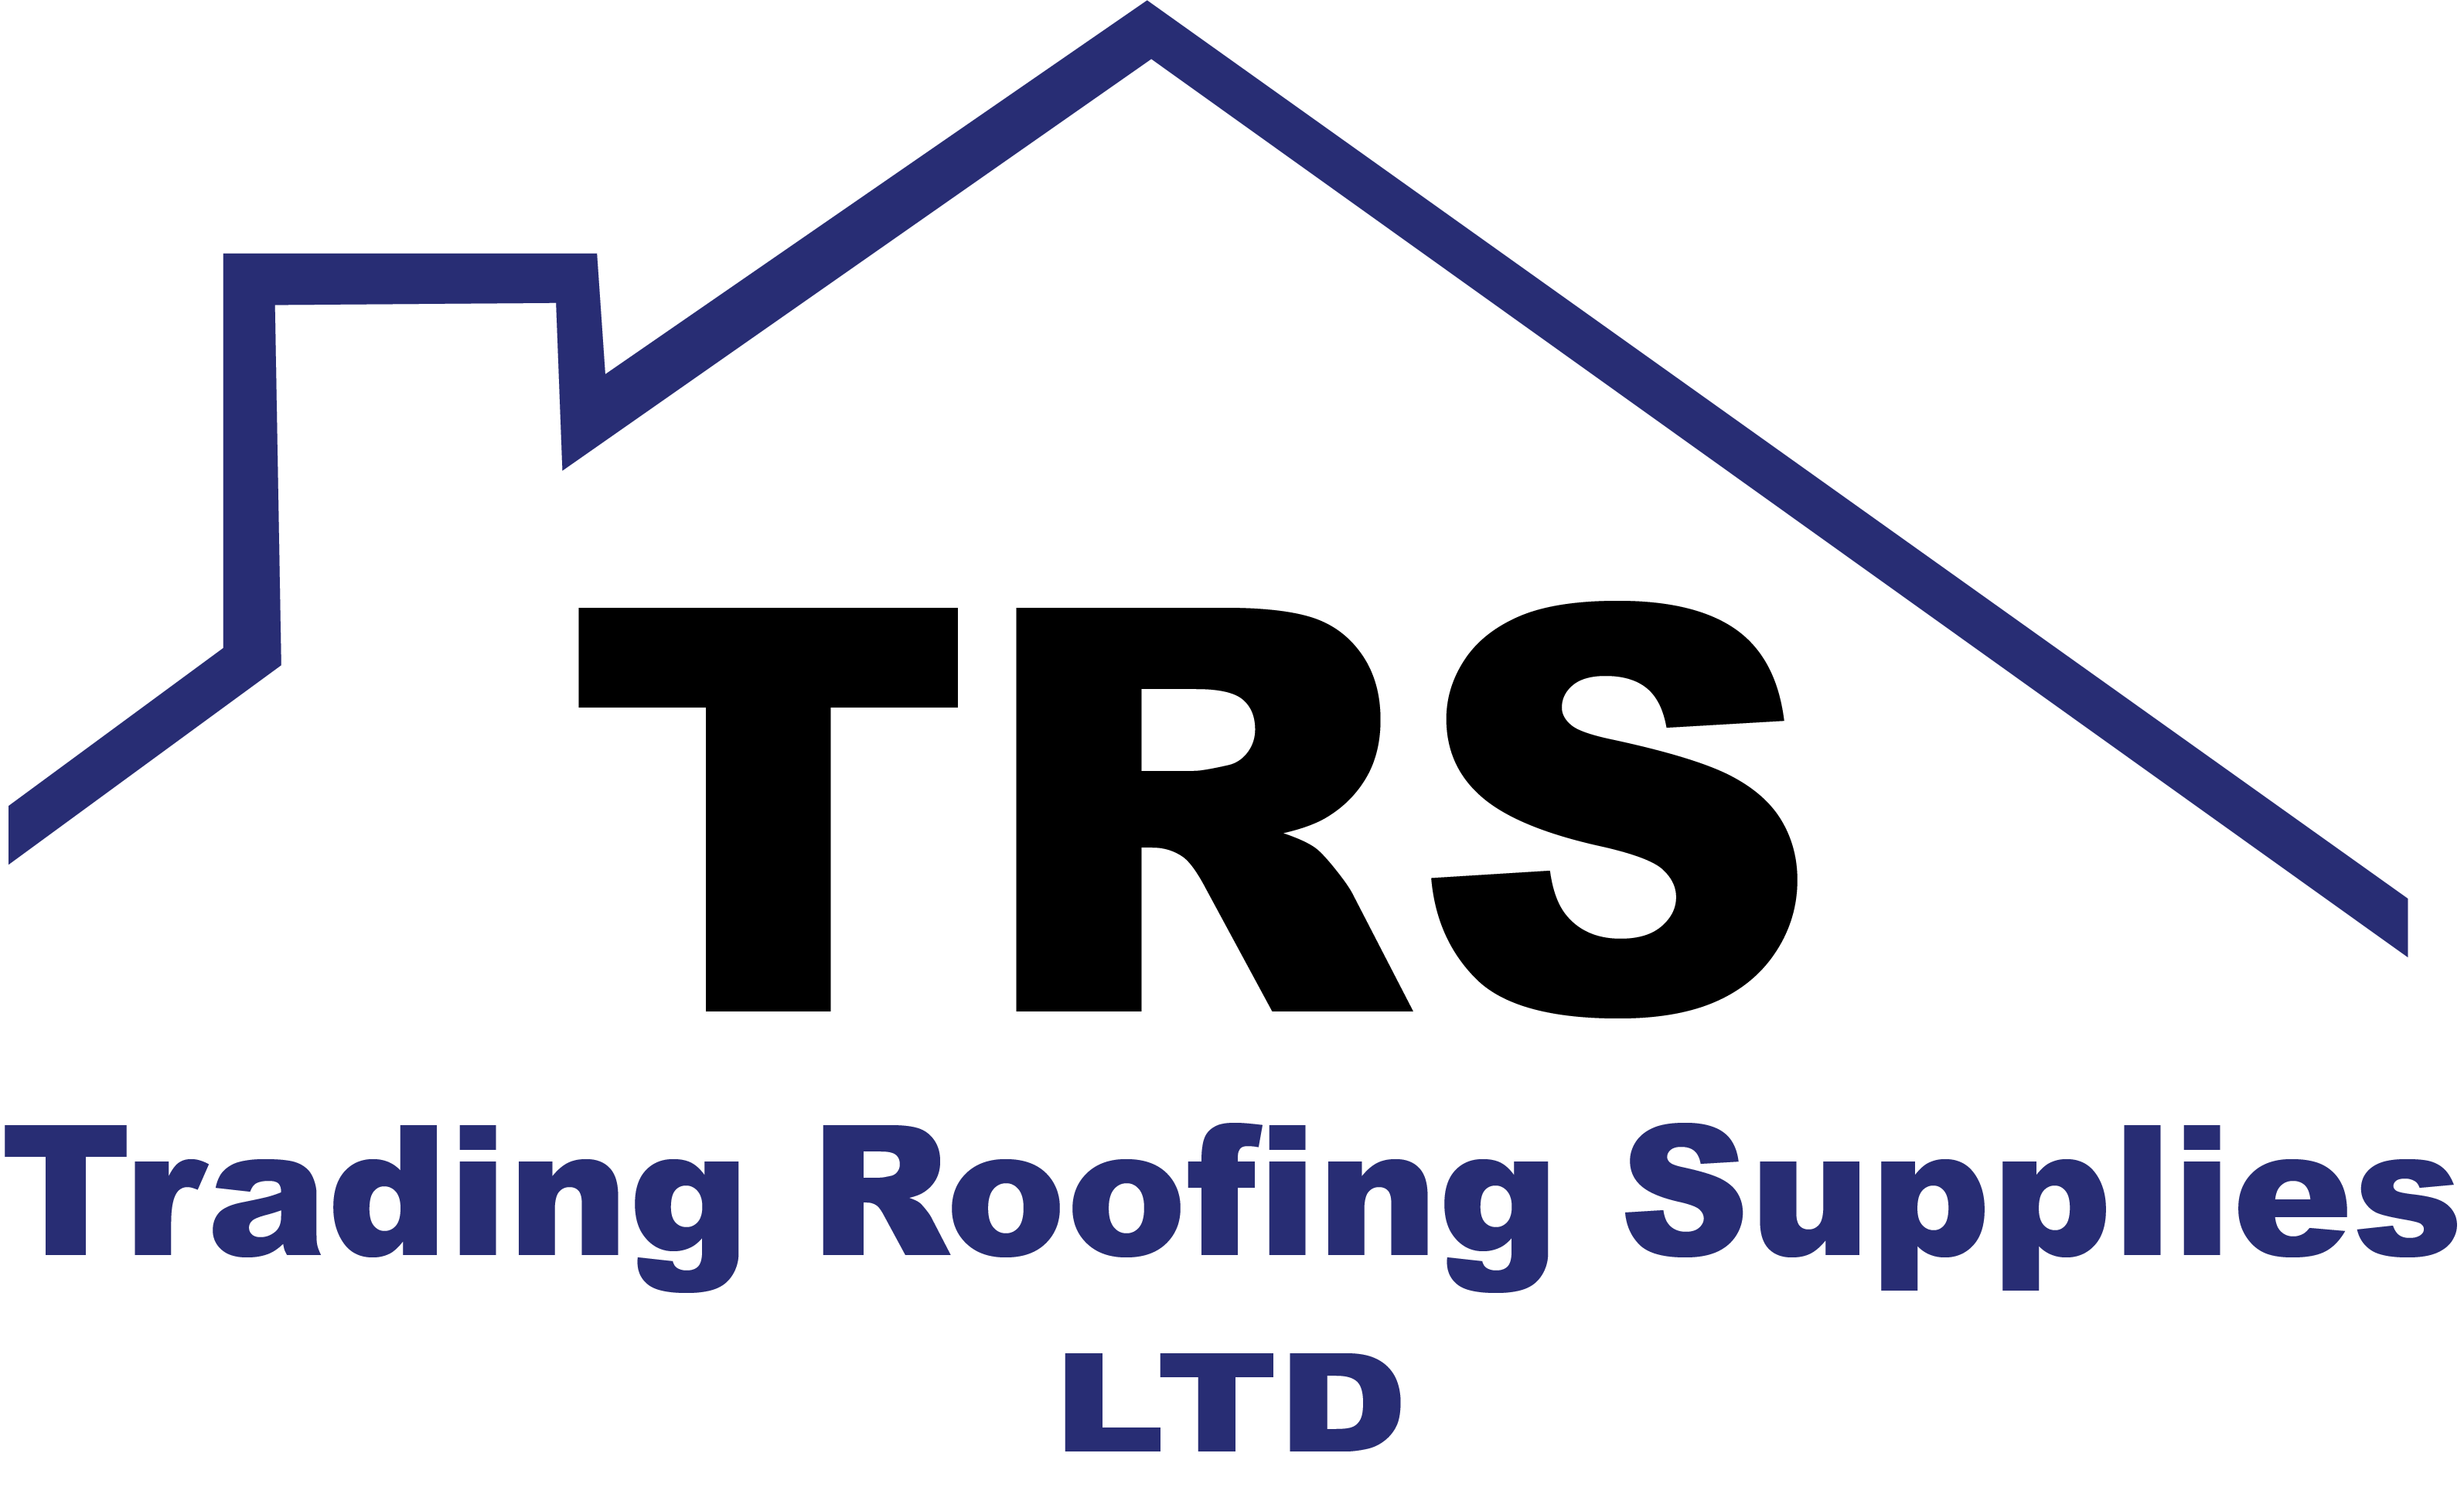 Trading Roofing Supplies | Materials: Trade and Public | Logo